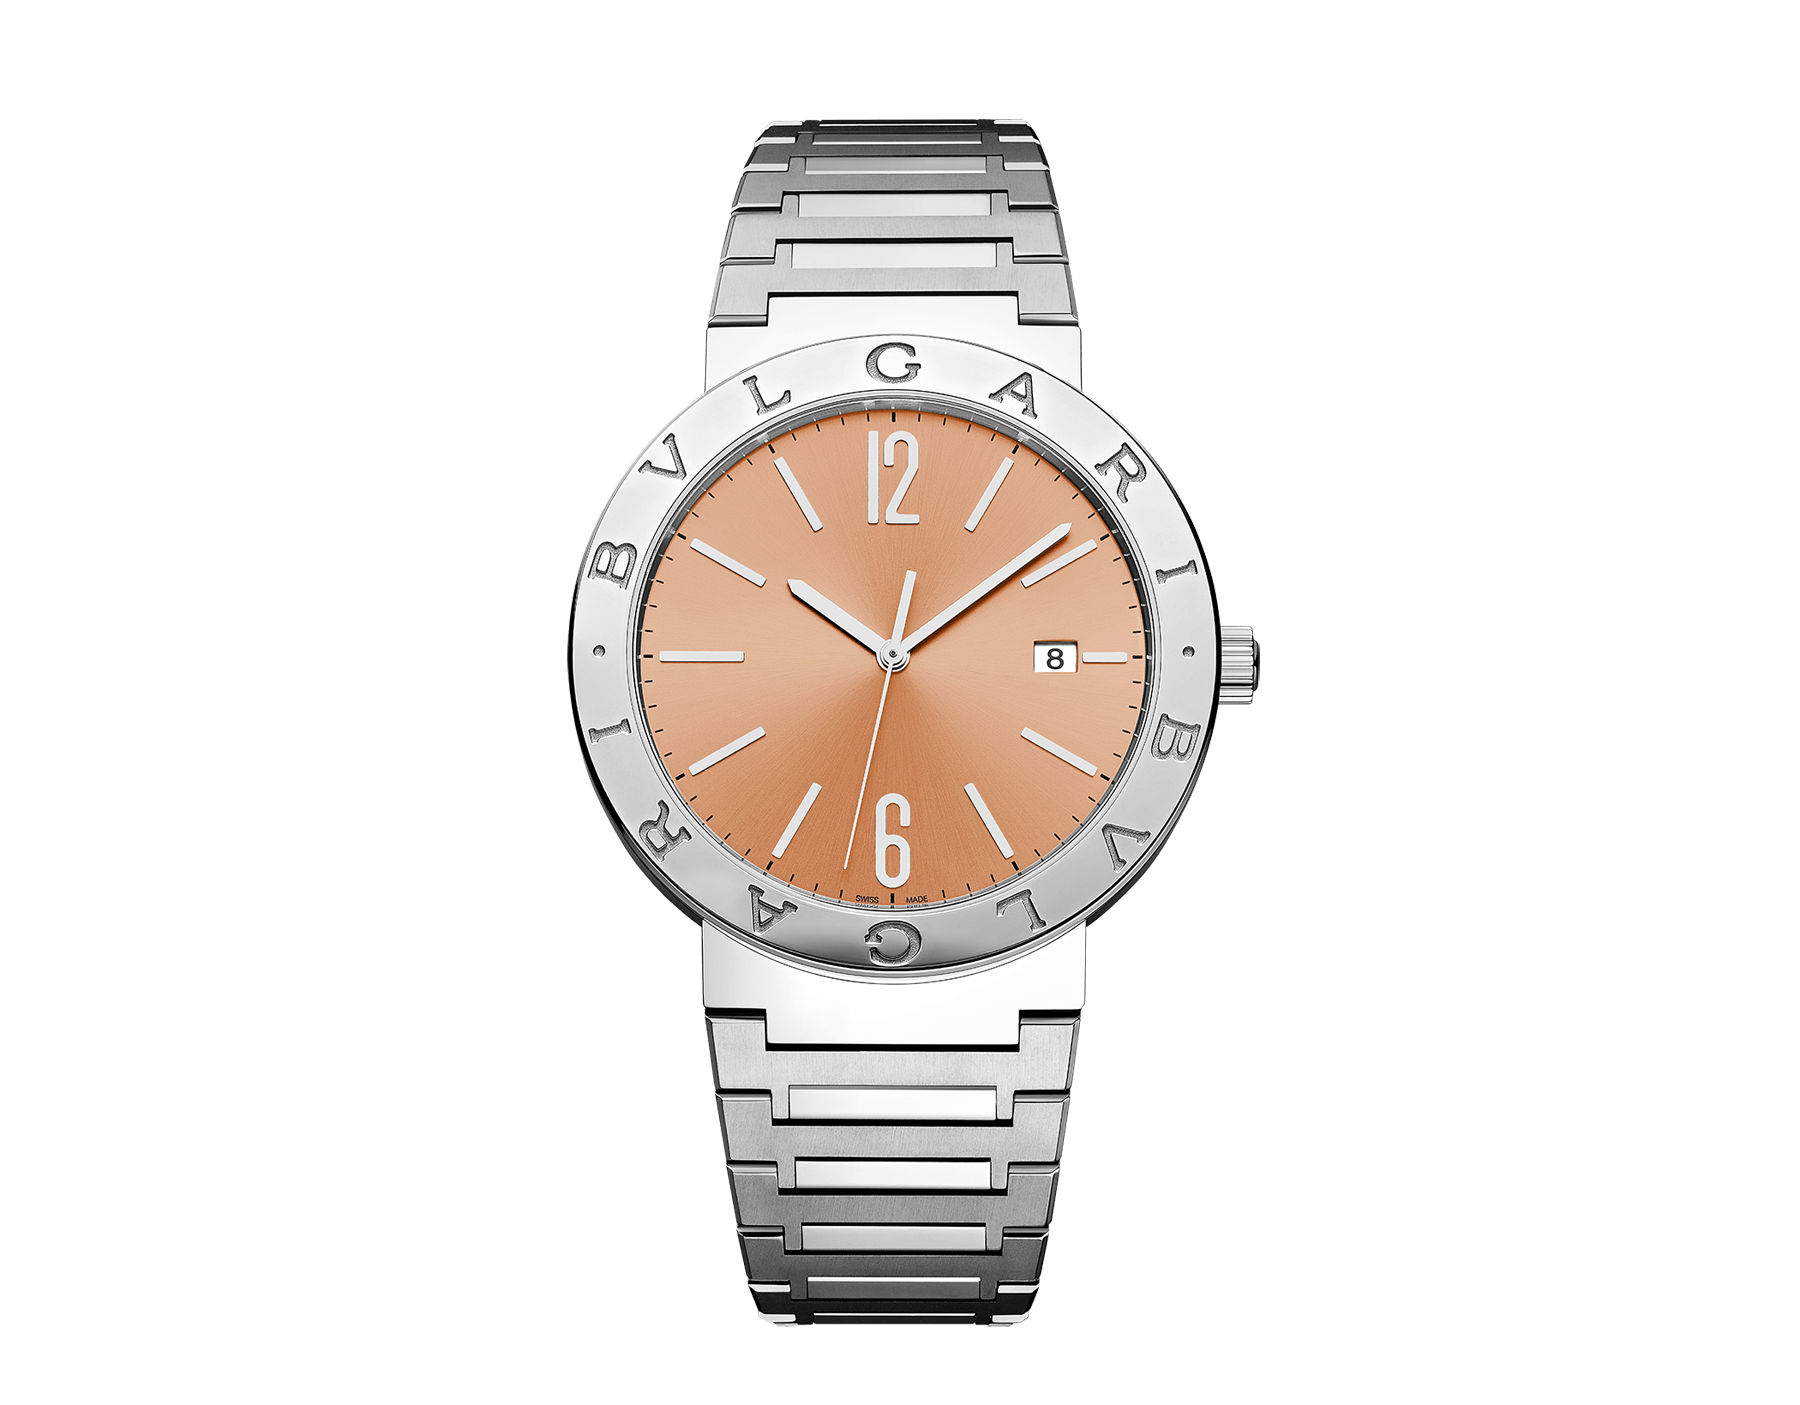 BULGARI BULGARI watch with mechanical manufacture automatic movement, satin-polished stainless steel case, bracelet and bezel engraved with the double BULGARI logo and orange lacquered sunray dial. Water-resistant up to 50 metres. Resort Limited Edition of 65 pieces. 103683 image 1